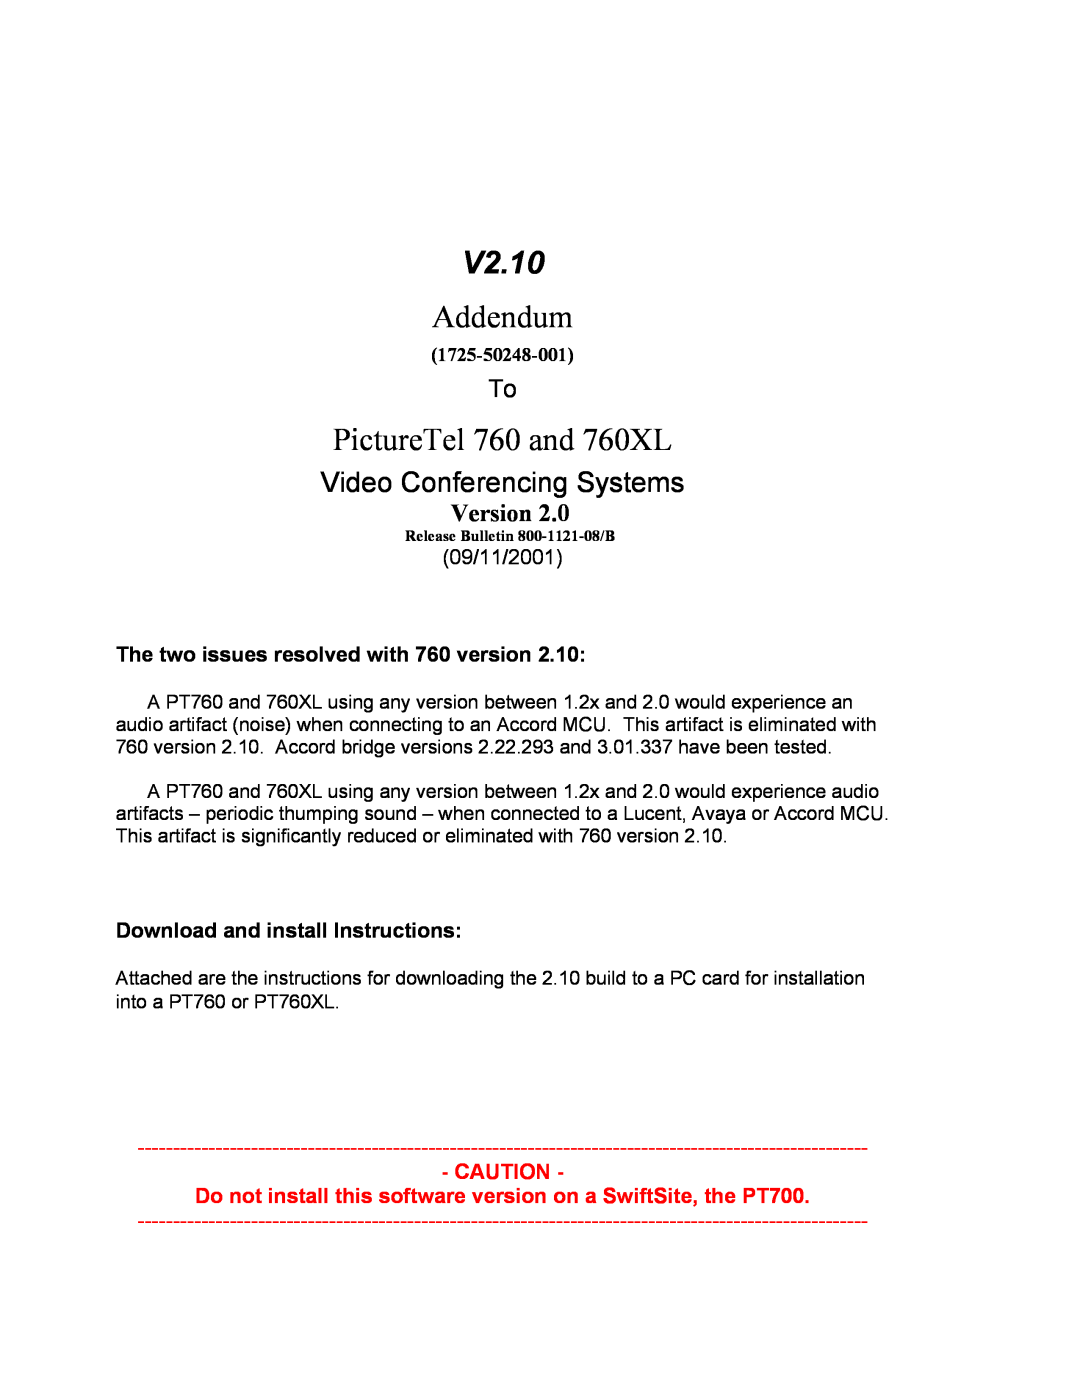 PictureTel manual V2.10, Addendum, PictureTel 760 and 760XL, Video Conferencing Systems, Version, 1725-50248-001 